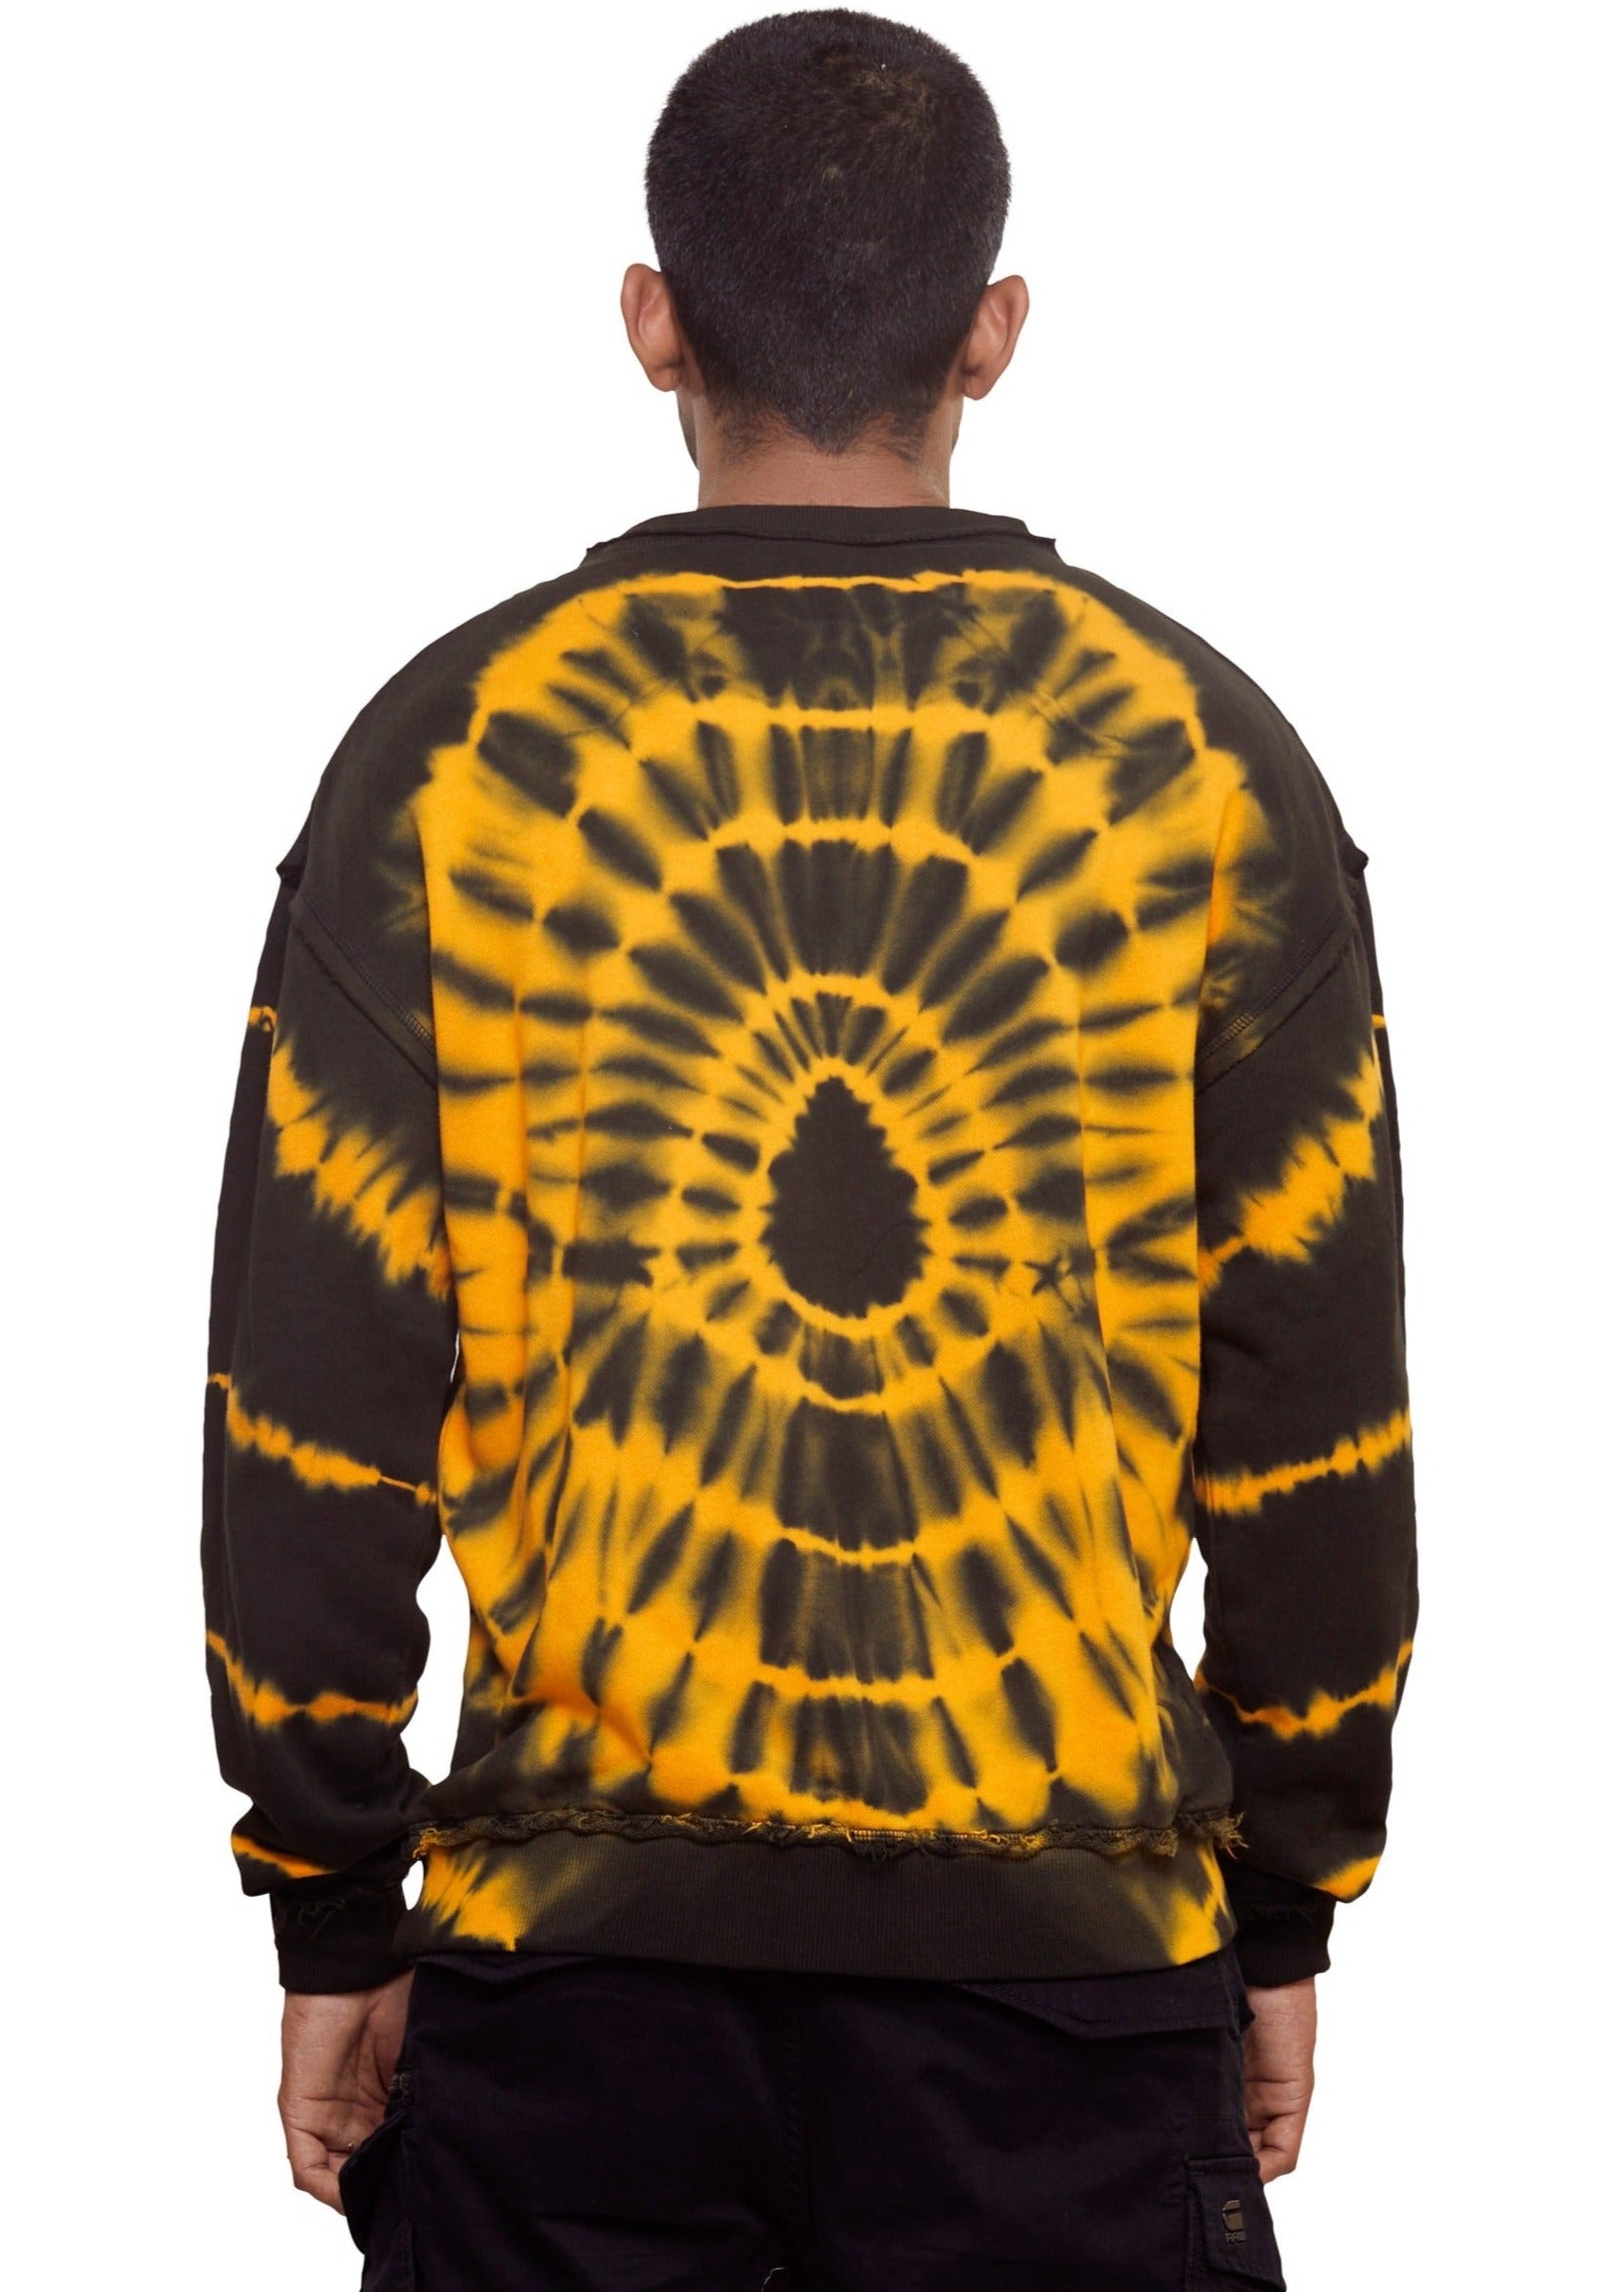 Black and orange Circle tie-dye cotton "Burning" appliquÃ© over-sized pull-over crewneck from the brand Haculla